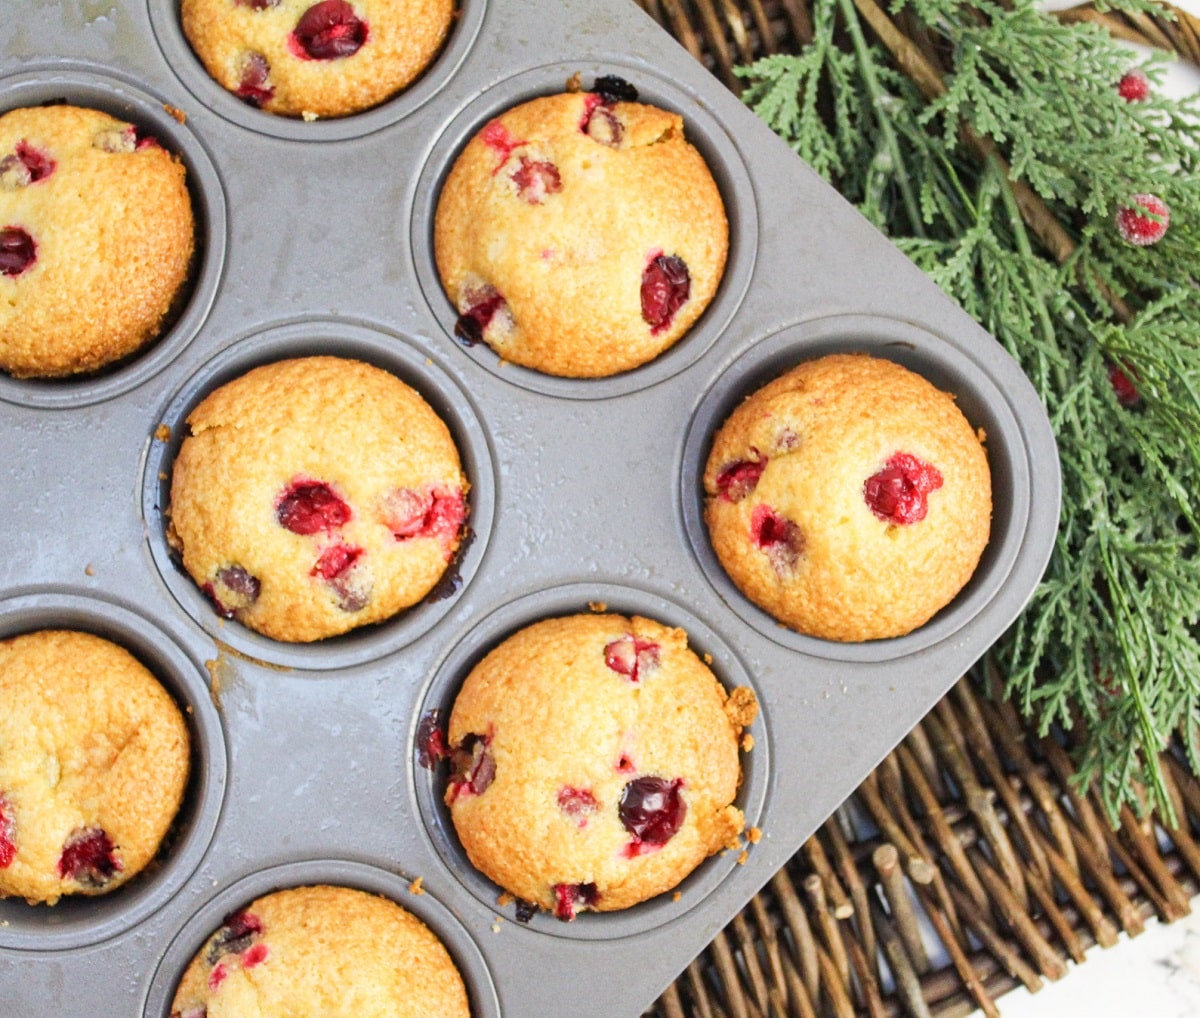 12 muffins in a muffin tin. Golden brown and topped with fresh cranberries.